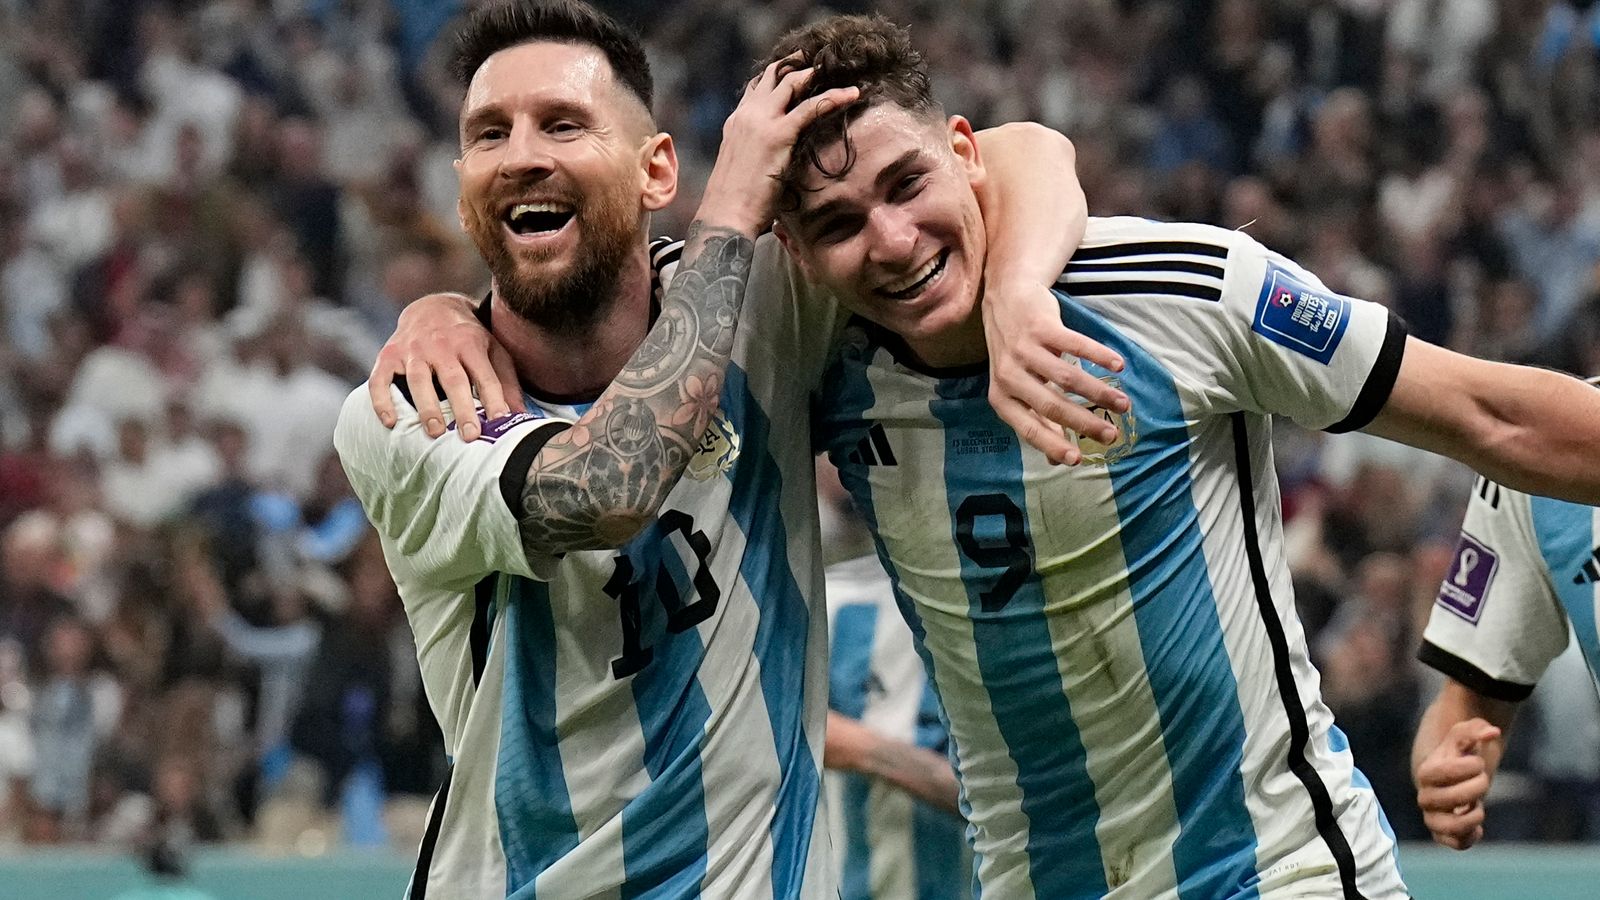 World Cup Champion Lionel Messi Plans To Play On For Argentina